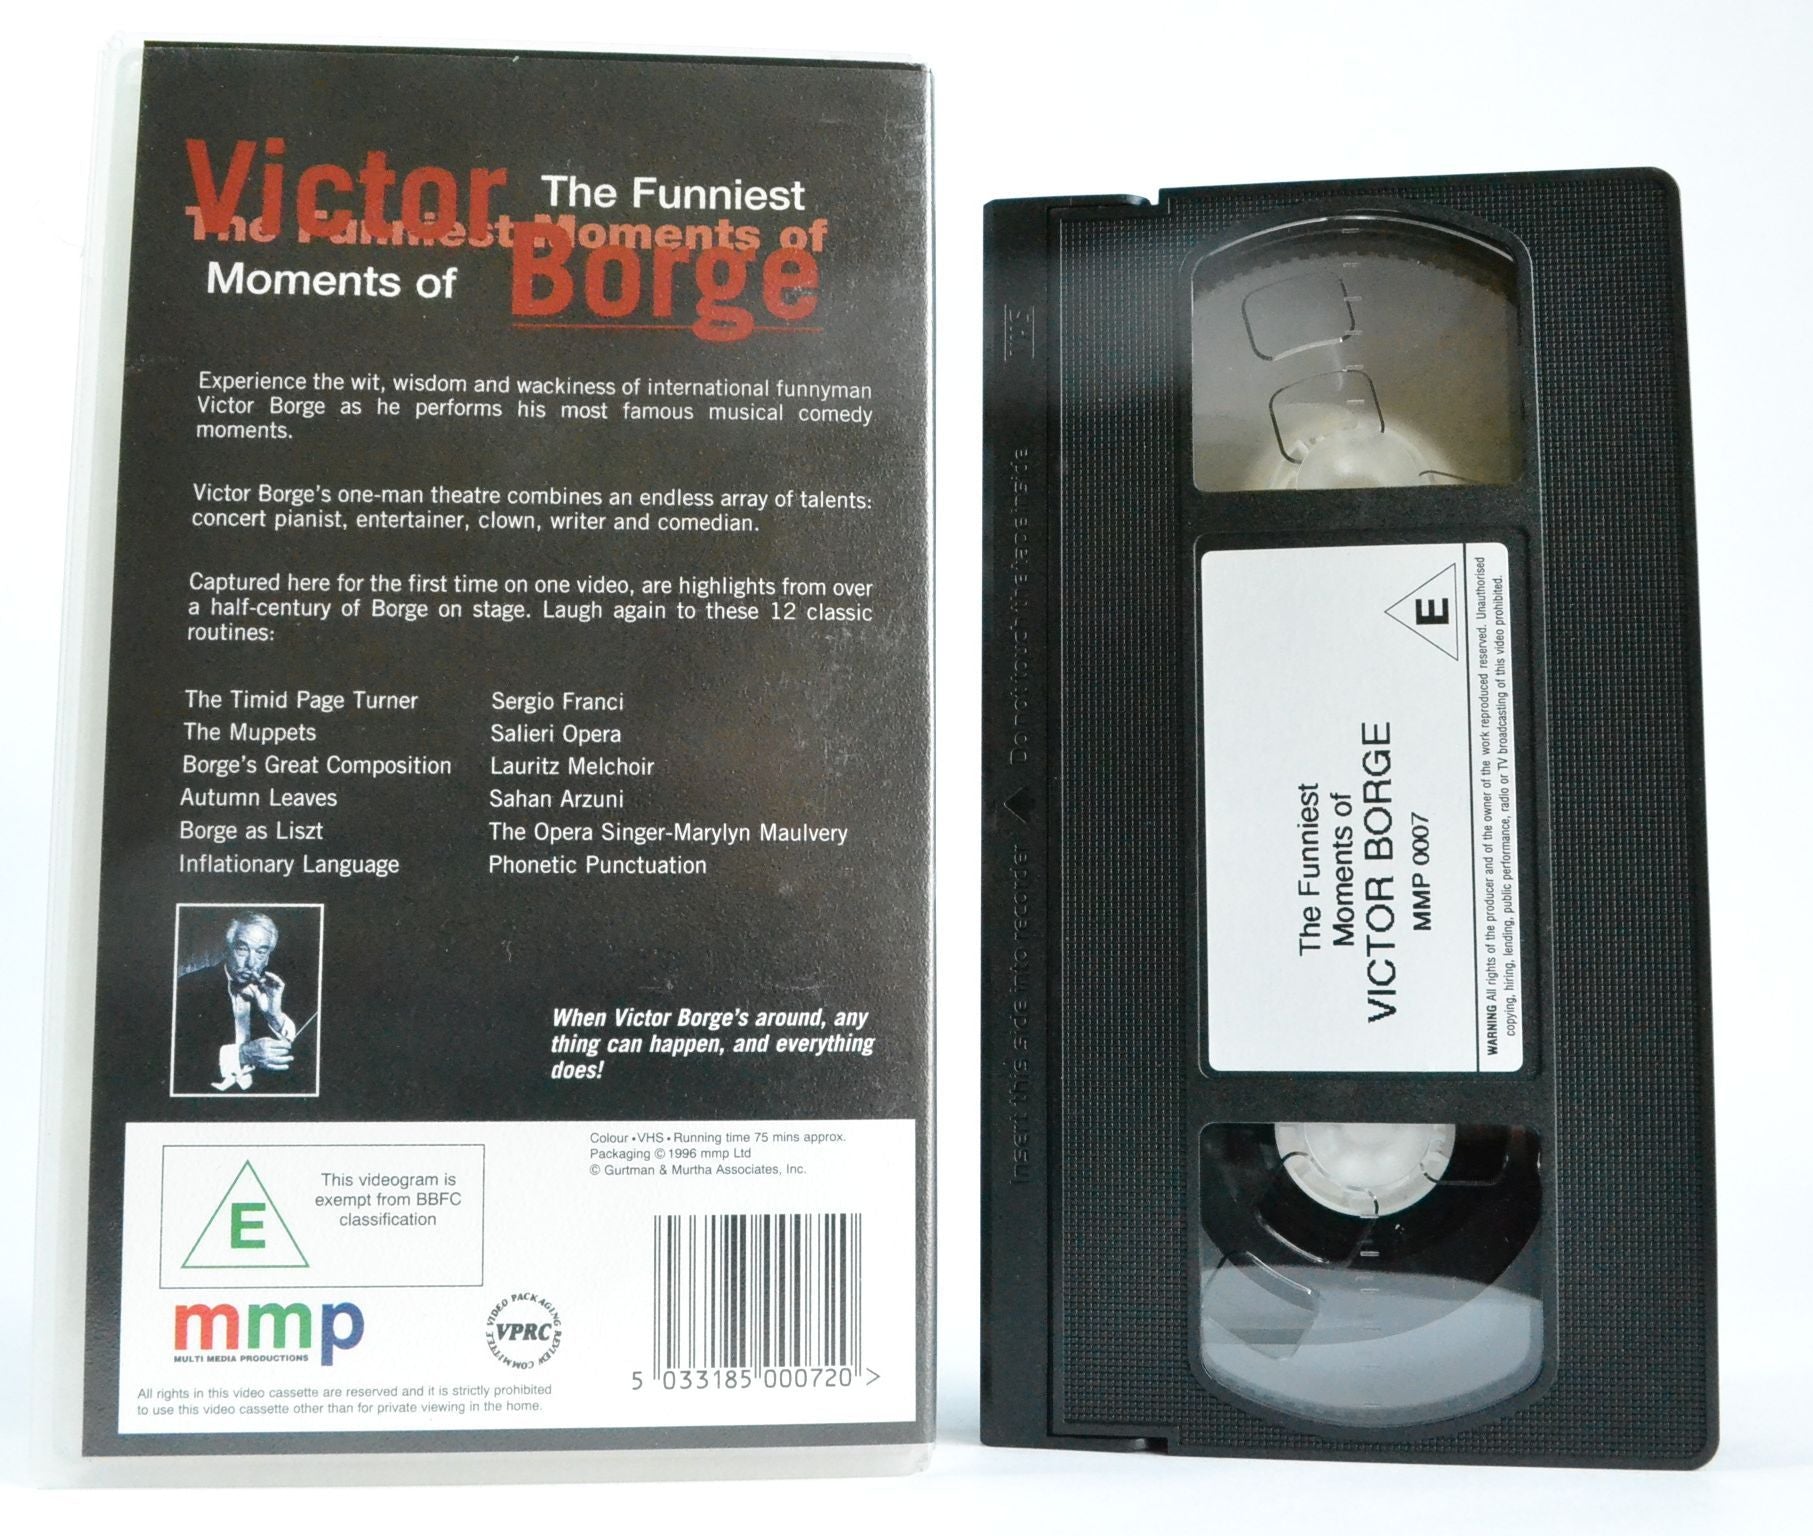 The Funniest Moments Of Victor Borge: 12 Classic Routines - Comedy Master - Pal - VHS-